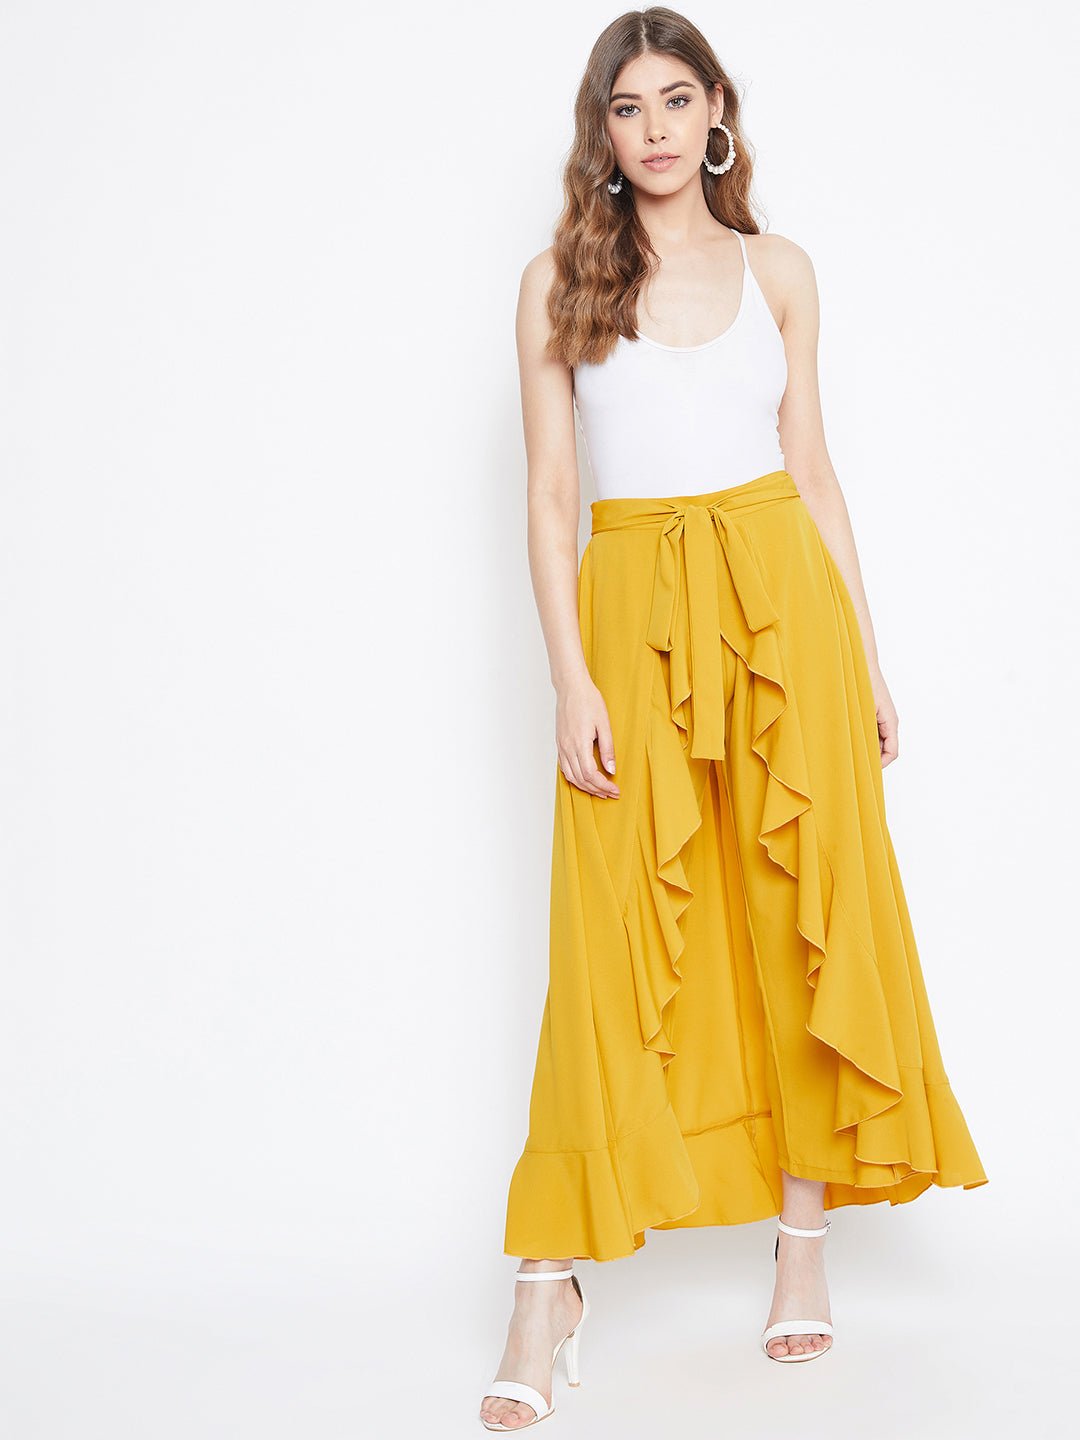 Folk Republic Women Solid Yellow Waist Tie-Up Ruffled Maxi Skirt With Attached Trousers - #folk republic#